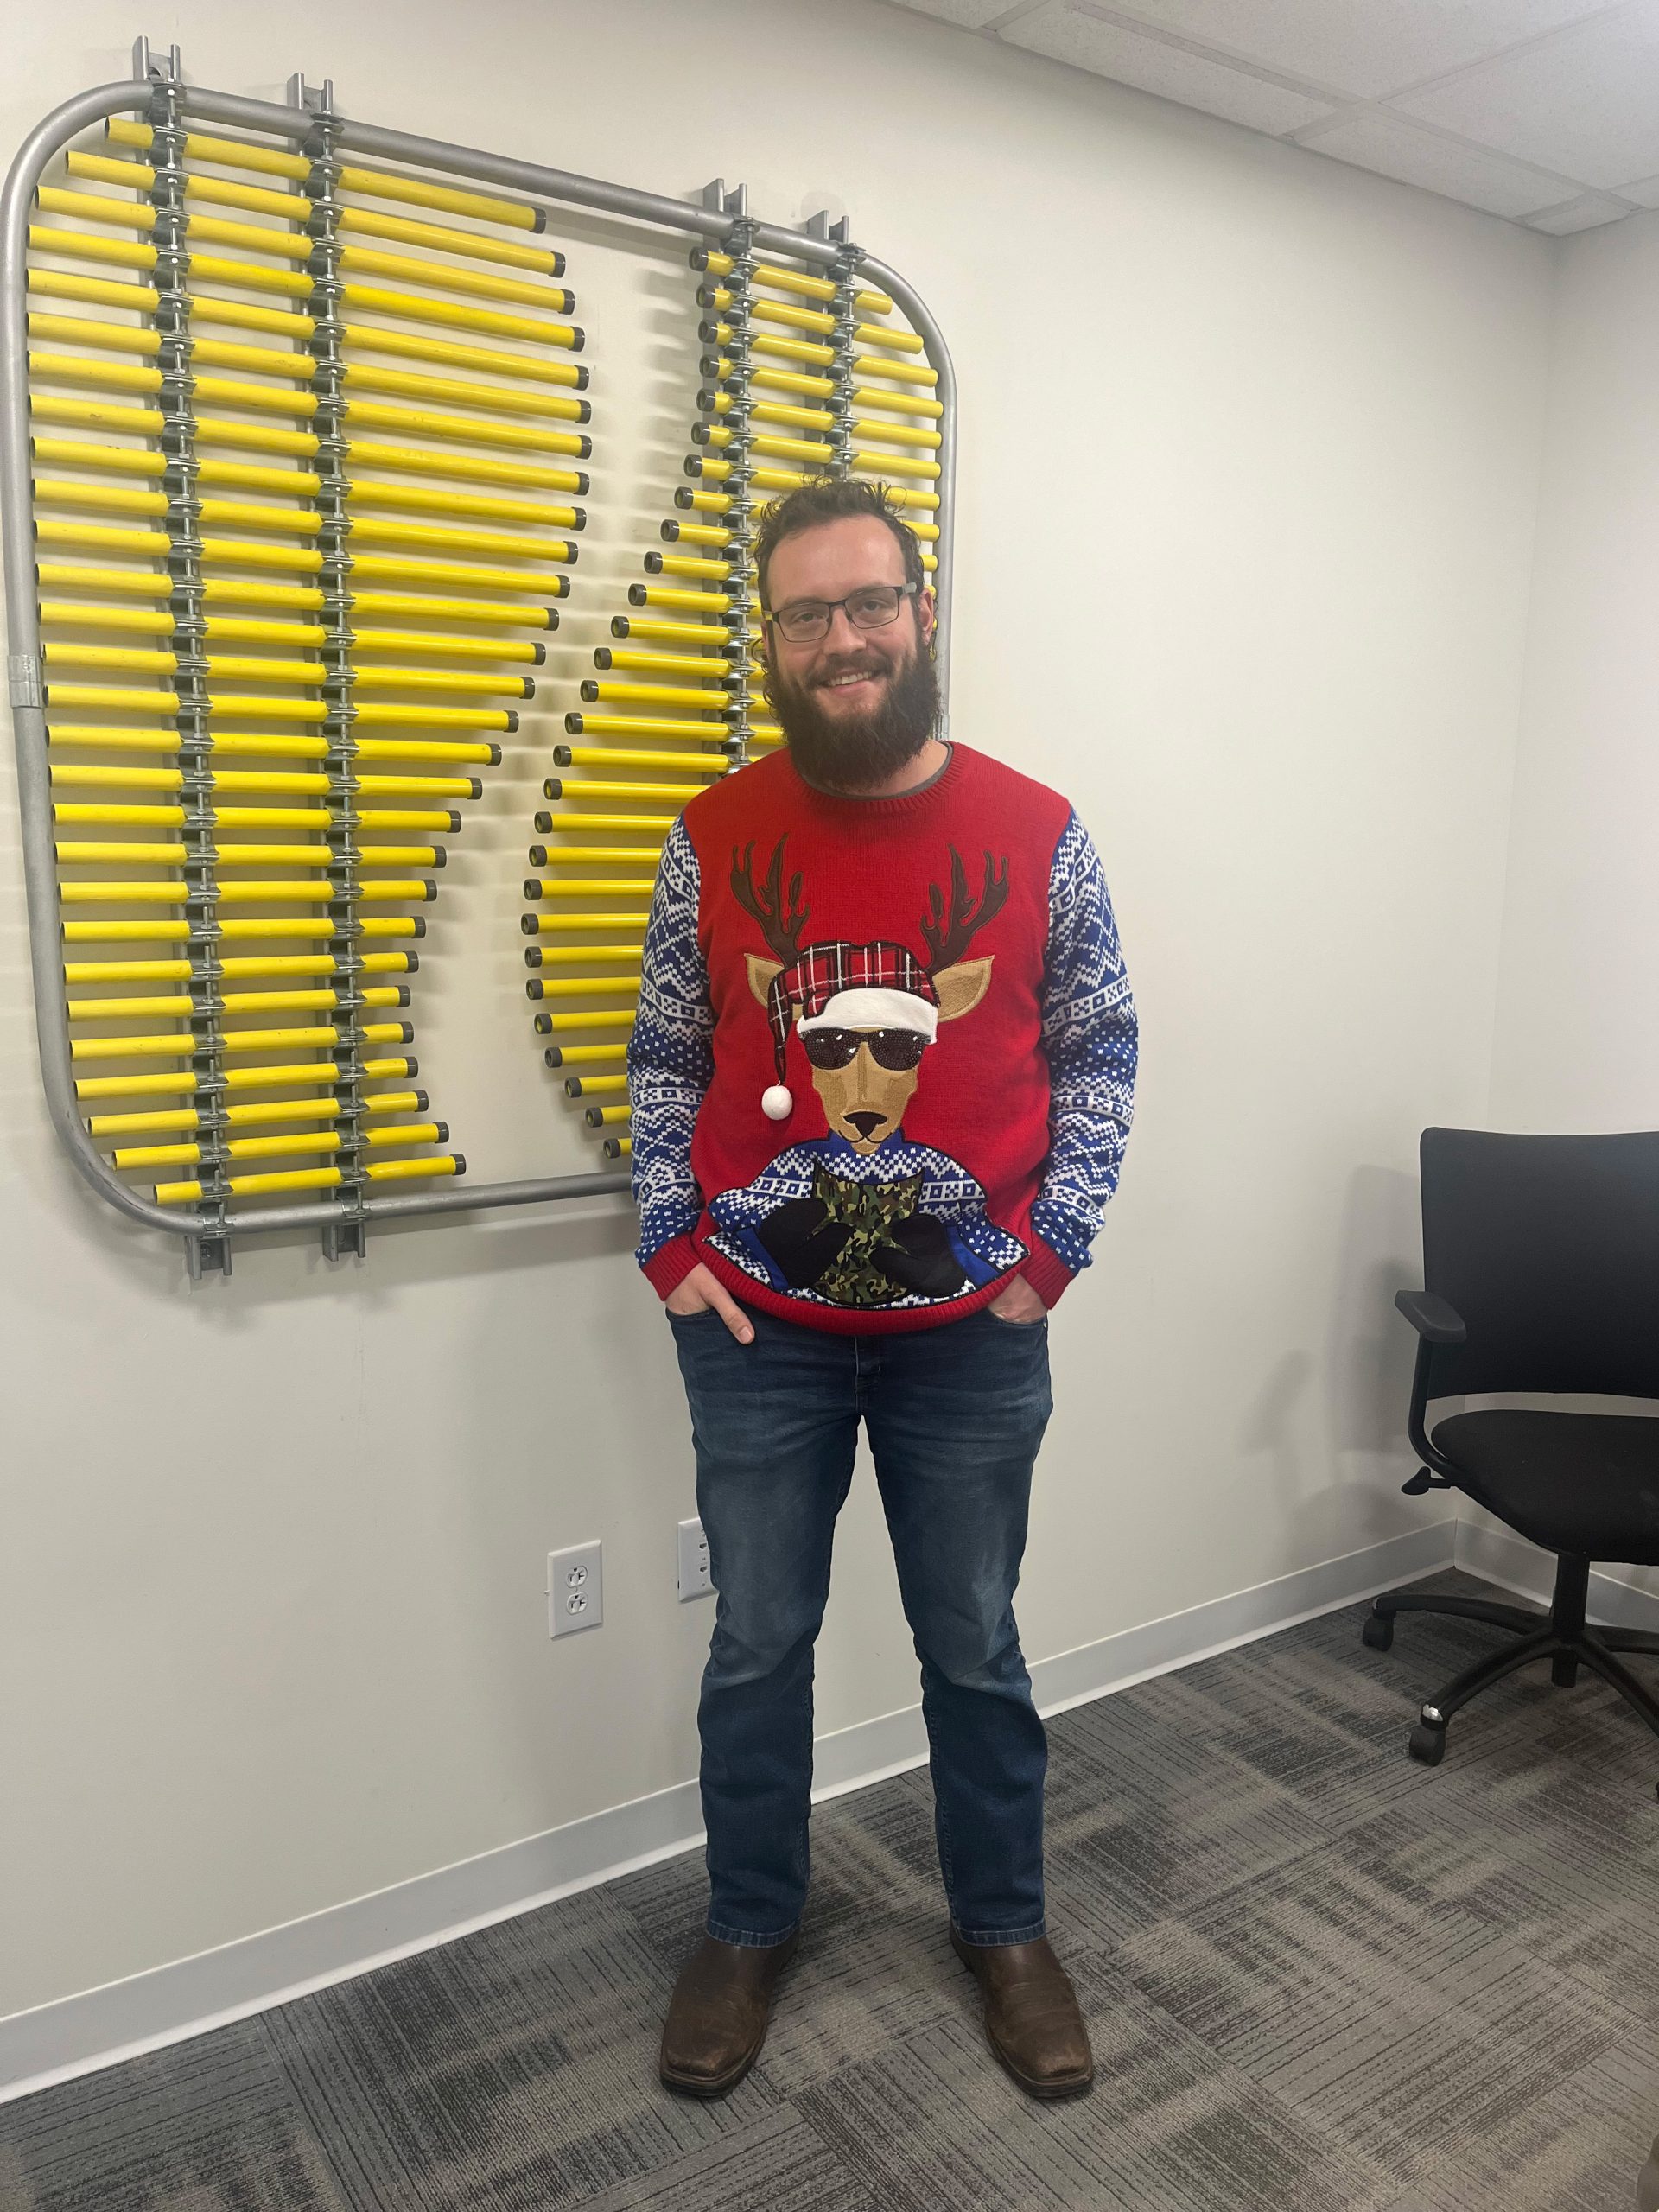 FANTASTIC UGLY HOLIDAY SWEATER POTLUCKS IN ALL REGIONS - Weifield ...